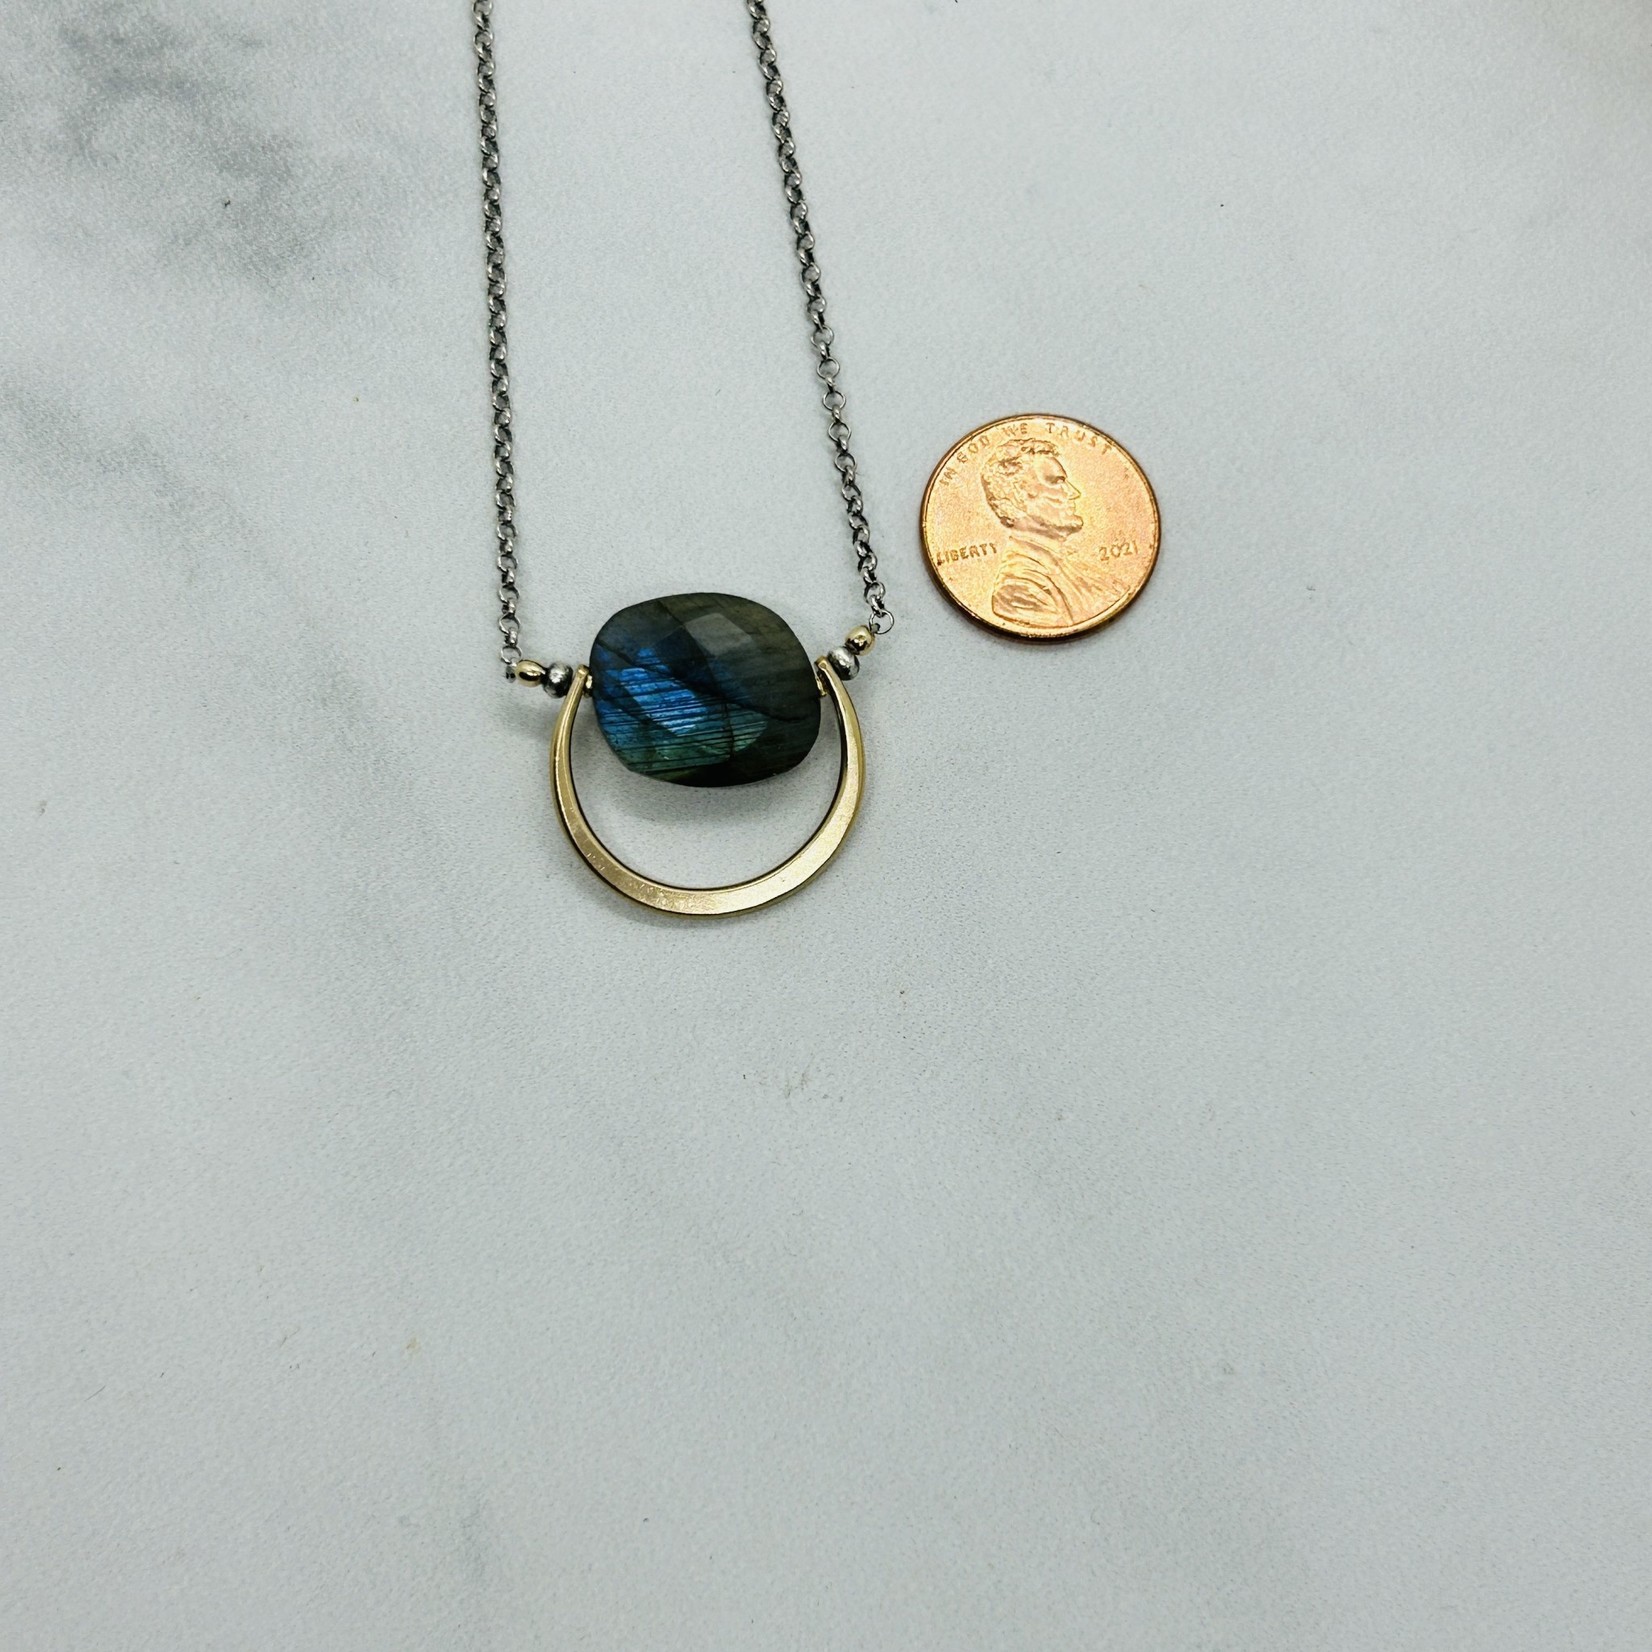 Handmade Faceted Labradorite Slab in 14kt semi circle on Oxdized Sterling 16" Chain Necklace